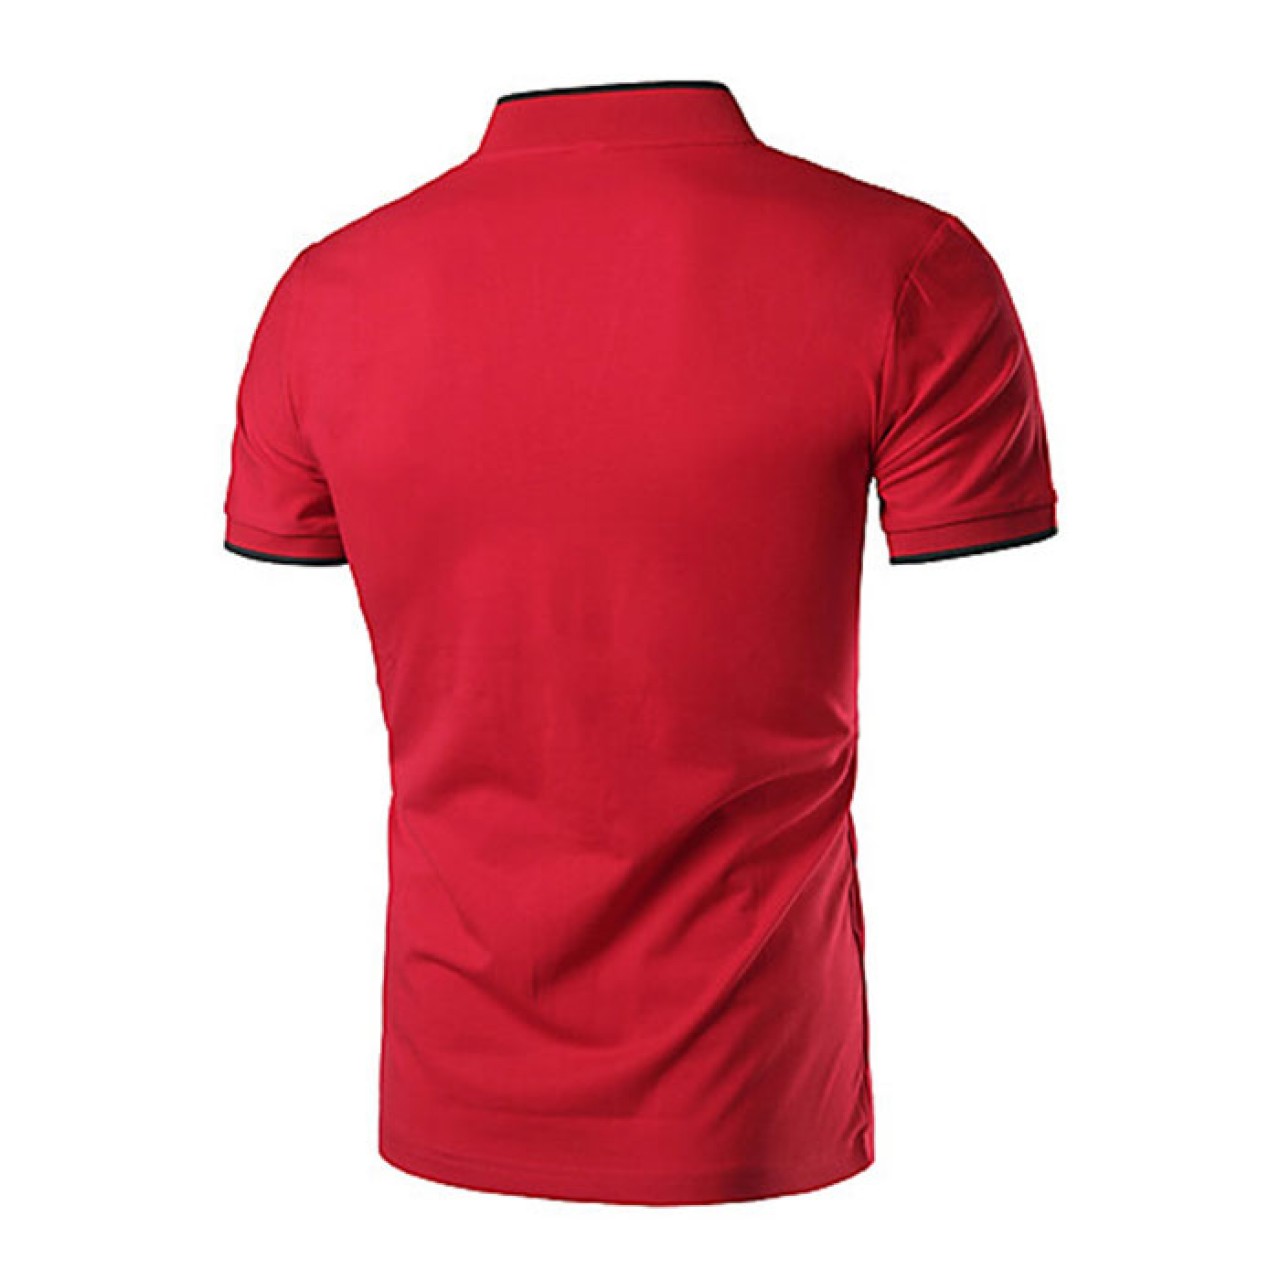 Men's New Short Collared Red Tees